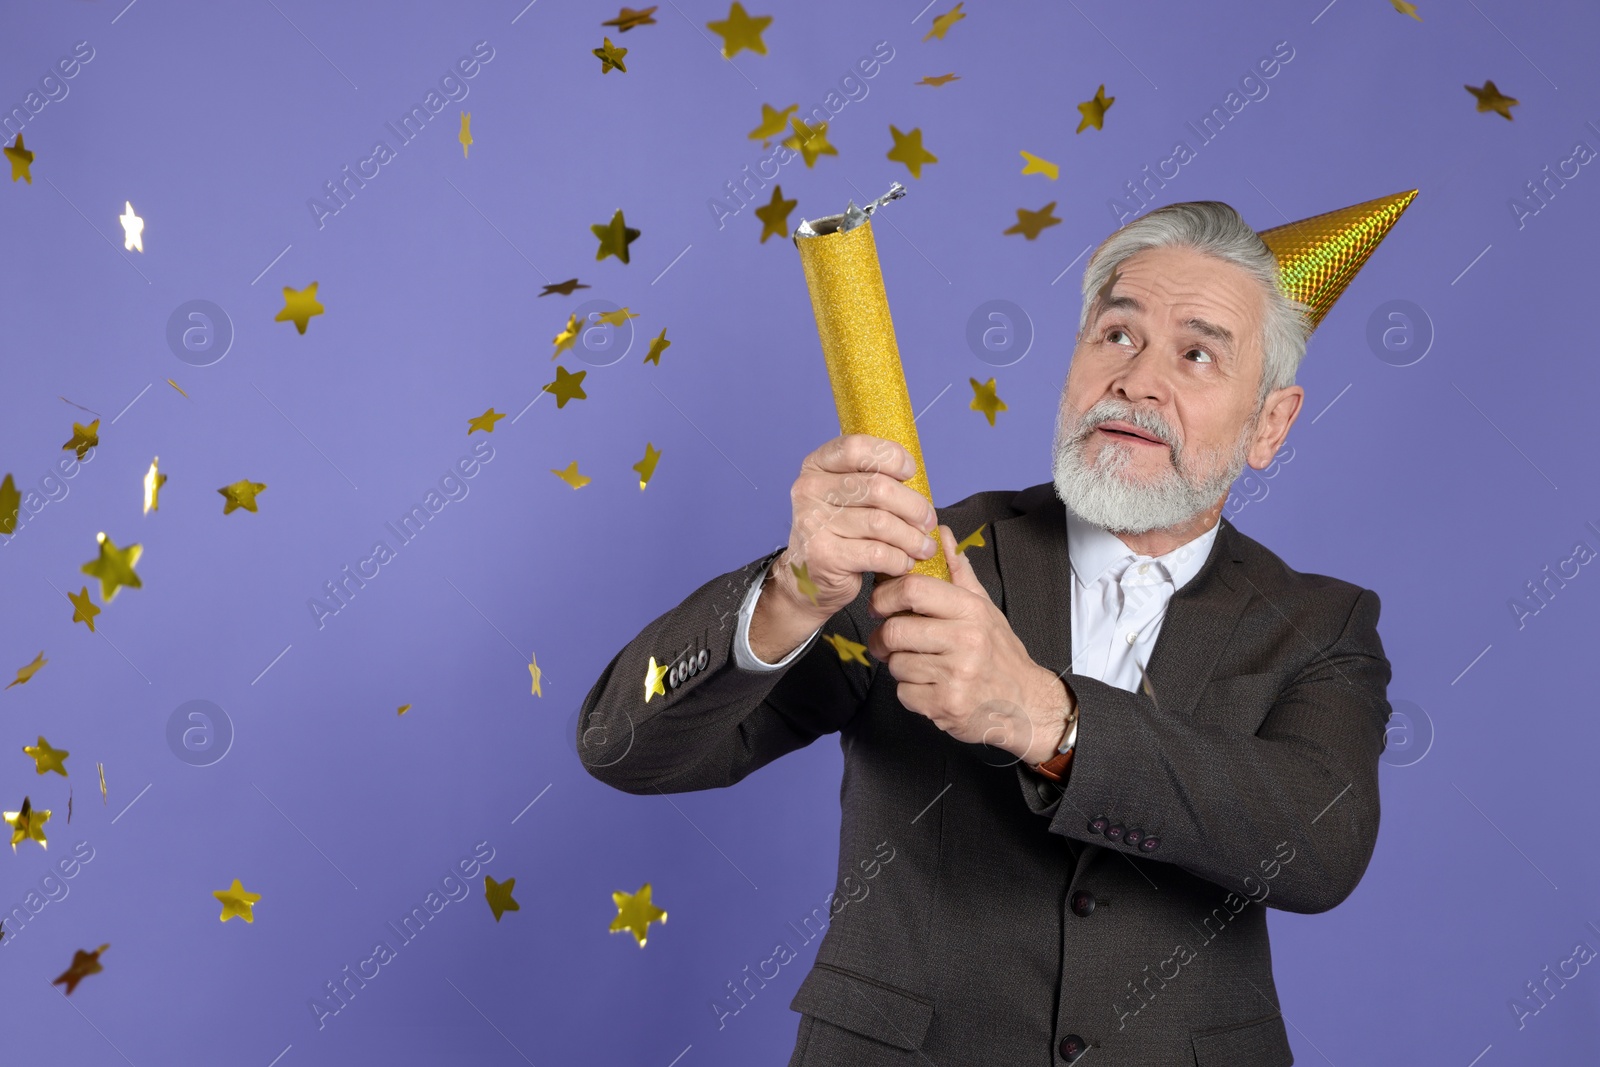 Photo of Man blowing up party popper on purple background